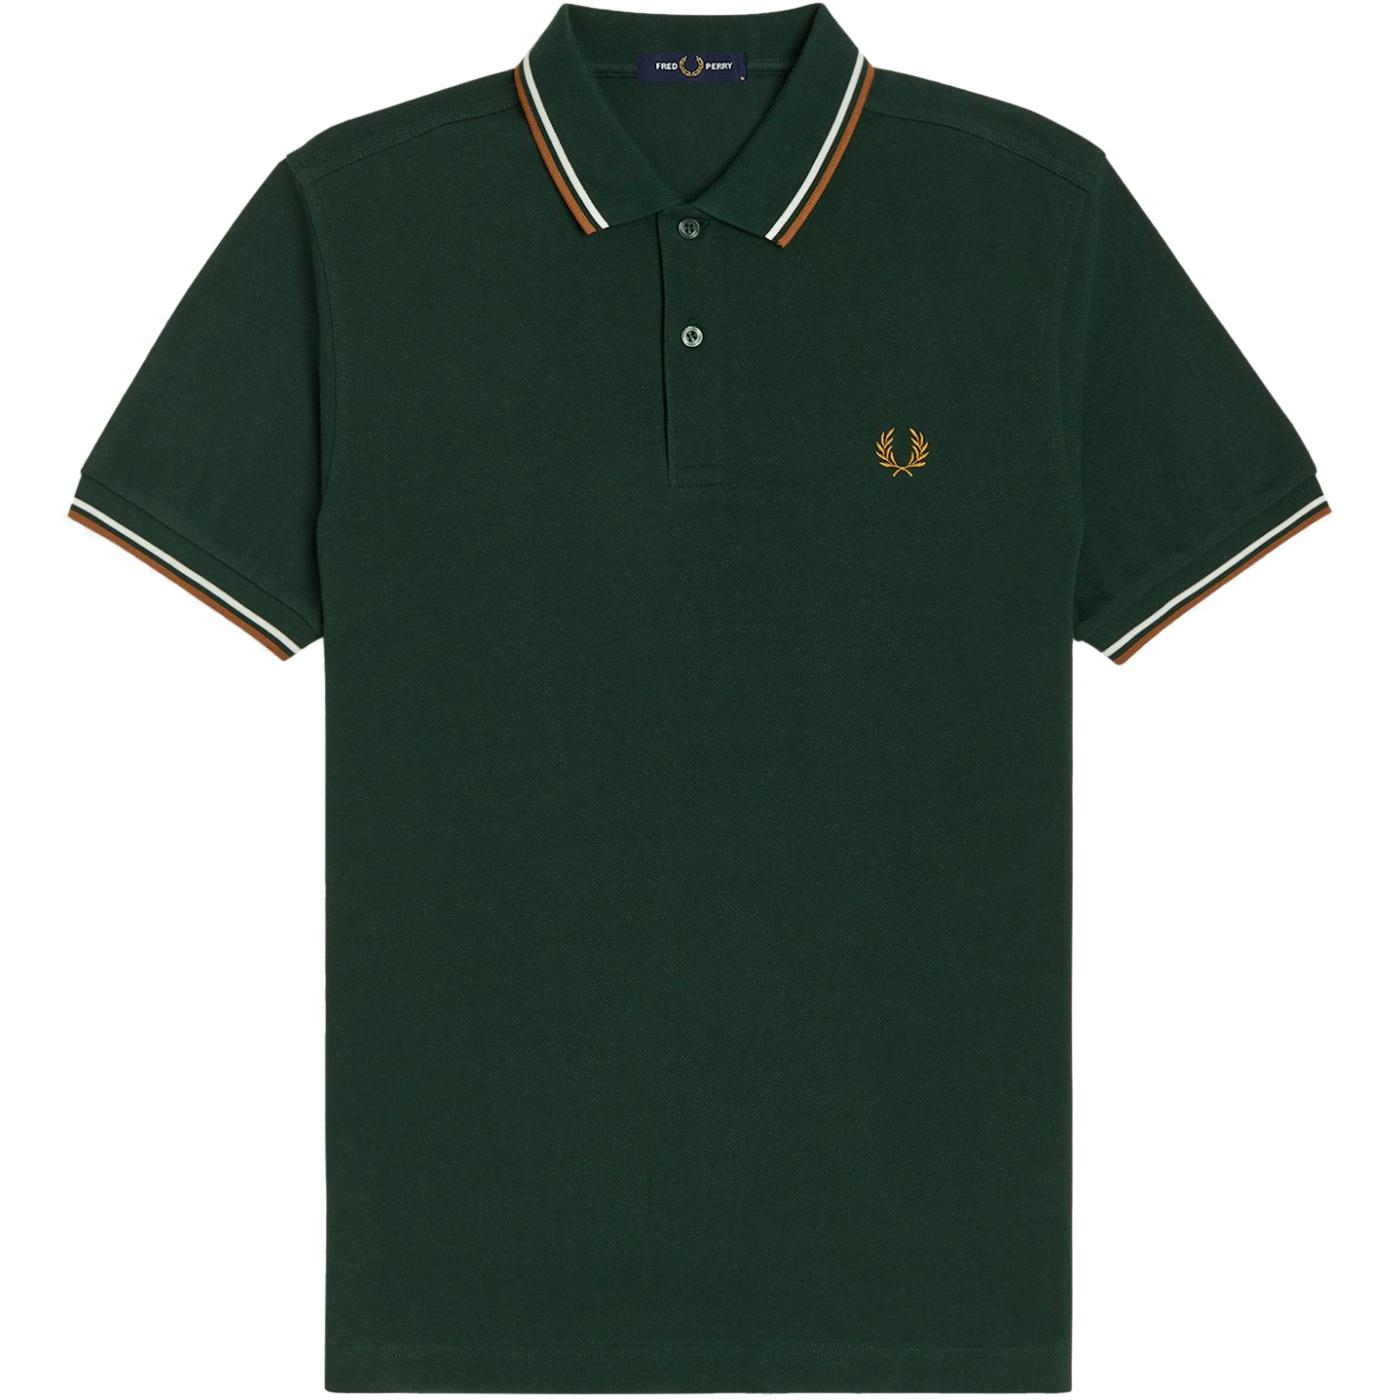 FRED PERRY M3600 Men's Twin Tipped Pique Polo E/SW